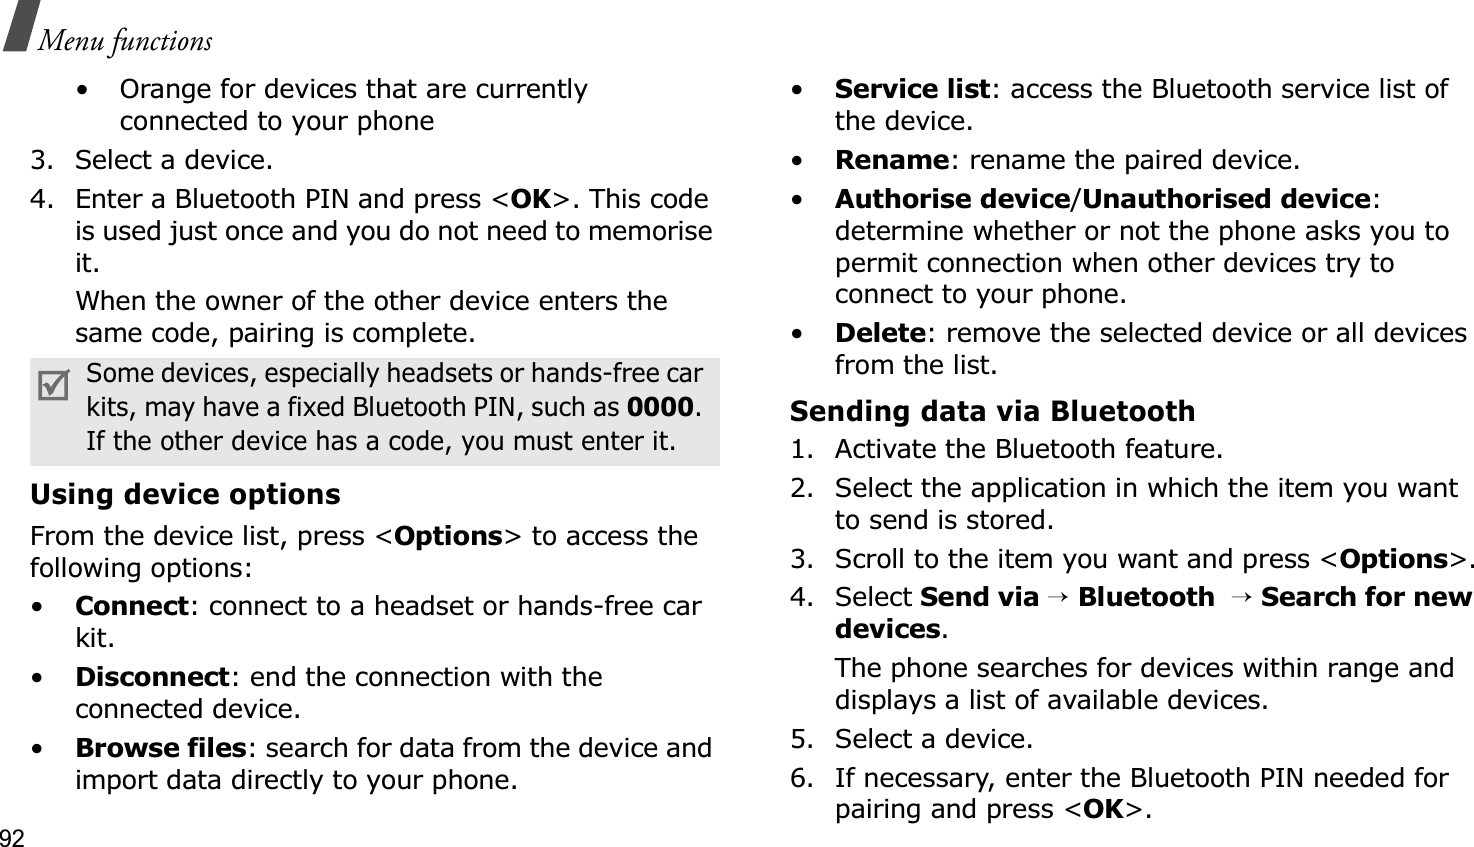 92Menu functions• Orange for devices that are currently connected to your phone3. Select a device.4. Enter a Bluetooth PIN and press &lt;OK&gt;. This code is used just once and you do not need to memorise it.When the owner of the other device enters the same code, pairing is complete.Using device optionsFrom the device list, press &lt;Options&gt; to access the following options: •Connect: connect to a headset or hands-free car kit.•Disconnect: end the connection with the connected device.•Browse files: search for data from the device and import data directly to your phone.•Service list: access the Bluetooth service list of the device.•Rename: rename the paired device.•Authorise device/Unauthorised device:determine whether or not the phone asks you to permit connection when other devices try to connect to your phone.•Delete: remove the selected device or all devices from the list.Sending data via Bluetooth1. Activate the Bluetooth feature.2. Select the application in which the item you want to send is stored. 3. Scroll to the item you want and press &lt;Options&gt;.4. Select Send via→Bluetooth→Search for new devices.The phone searches for devices within range and displays a list of available devices.5. Select a device.6. If necessary, enter the Bluetooth PIN needed for pairing and press &lt;OK&gt;.Some devices, especially headsets or hands-free car kits, may have a fixed Bluetooth PIN, such as 0000.If the other device has a code, you must enter it.